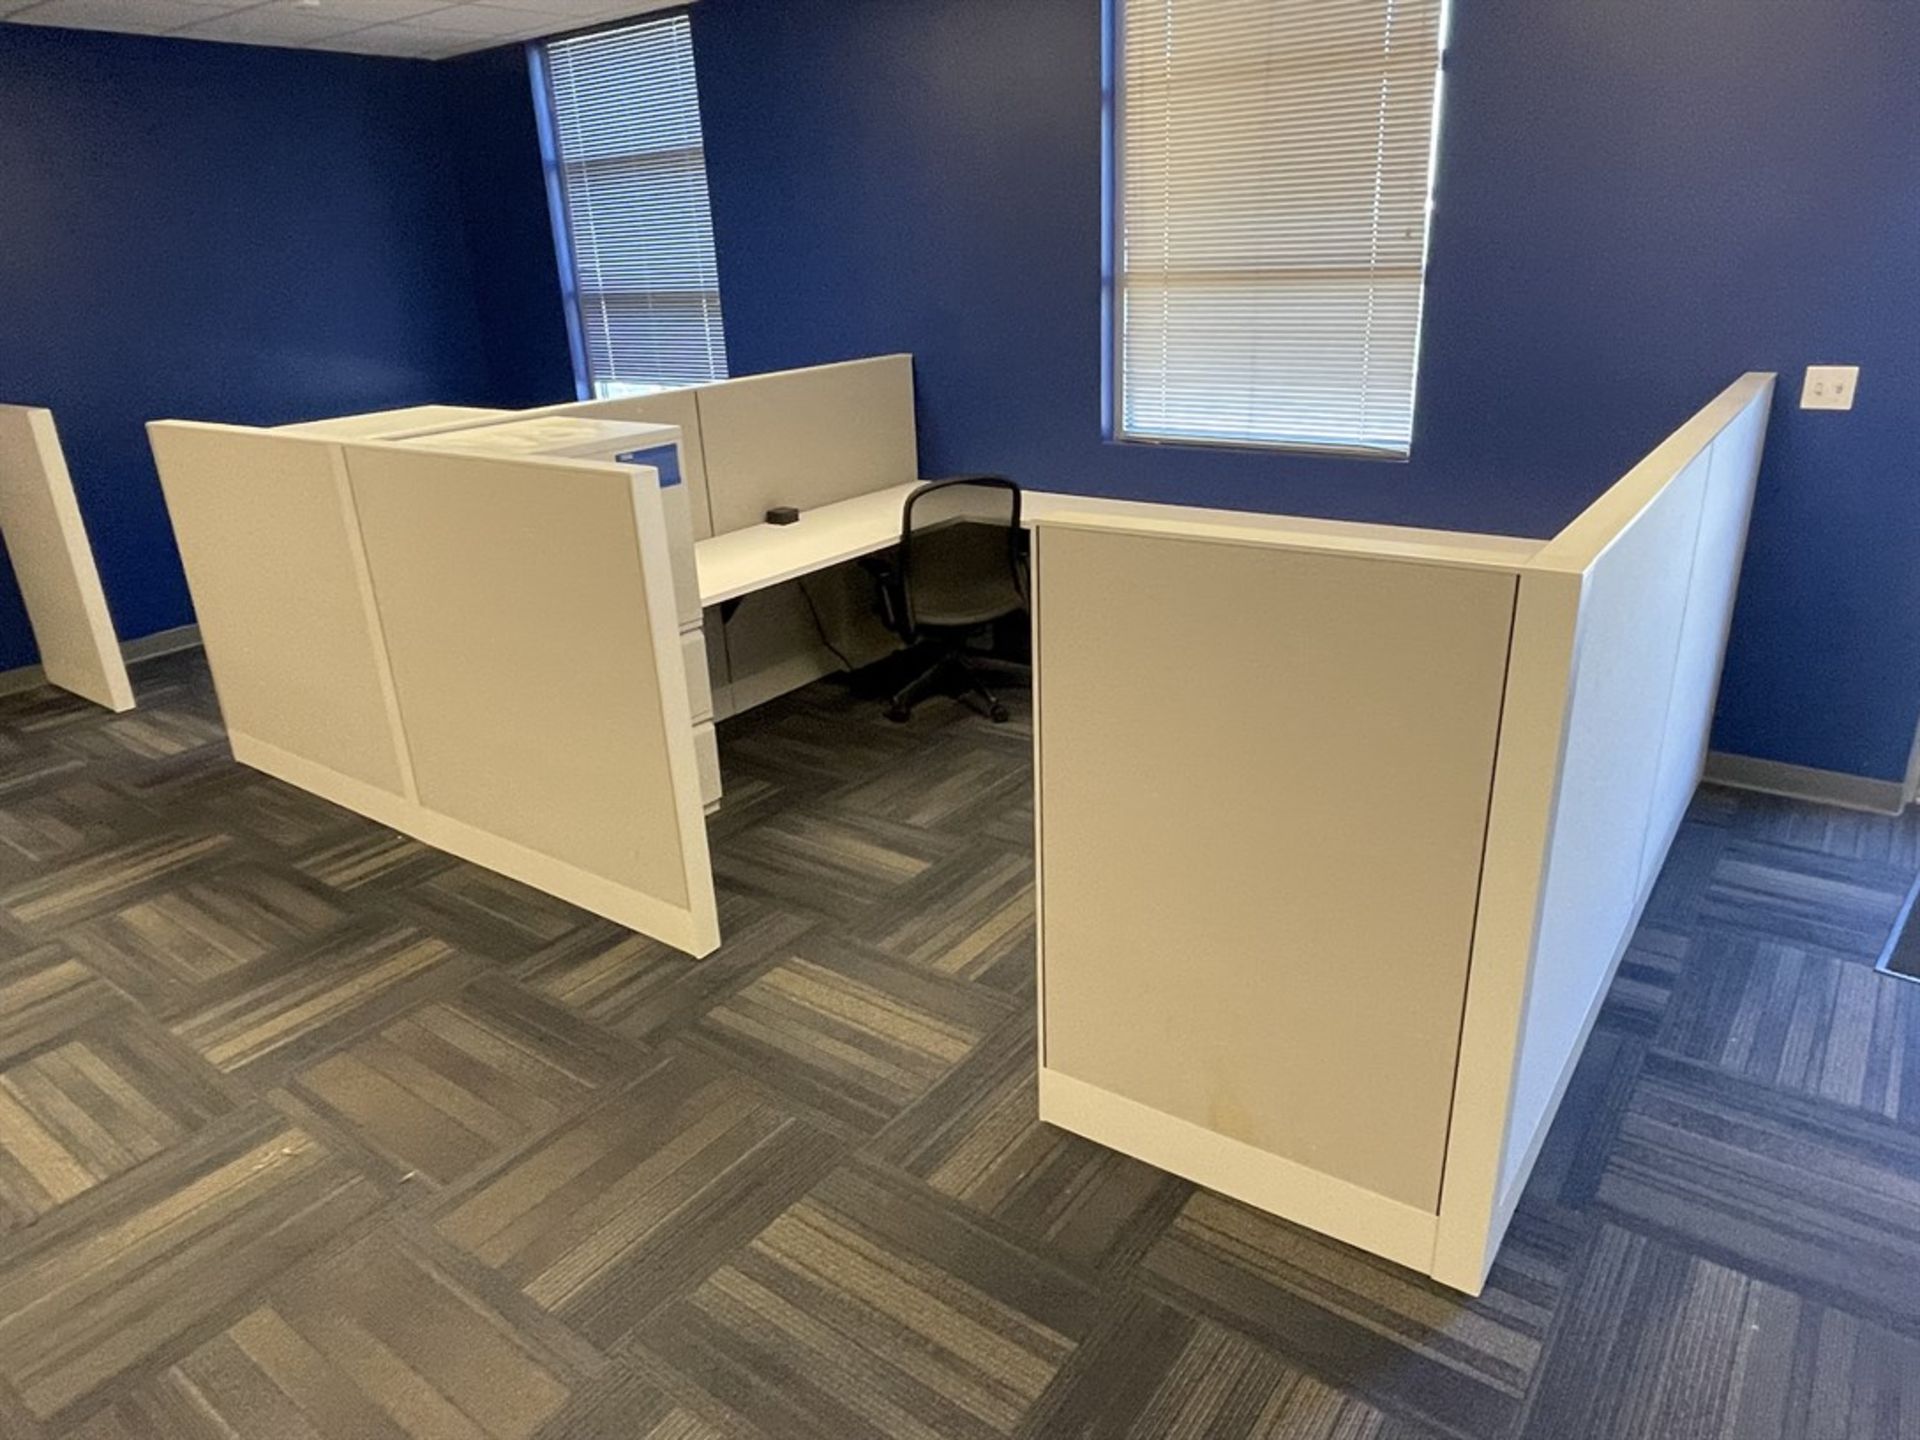 Lot of (12) Cubicles w/ Desk, Chairs, Tables and Cabinets - Image 6 of 7